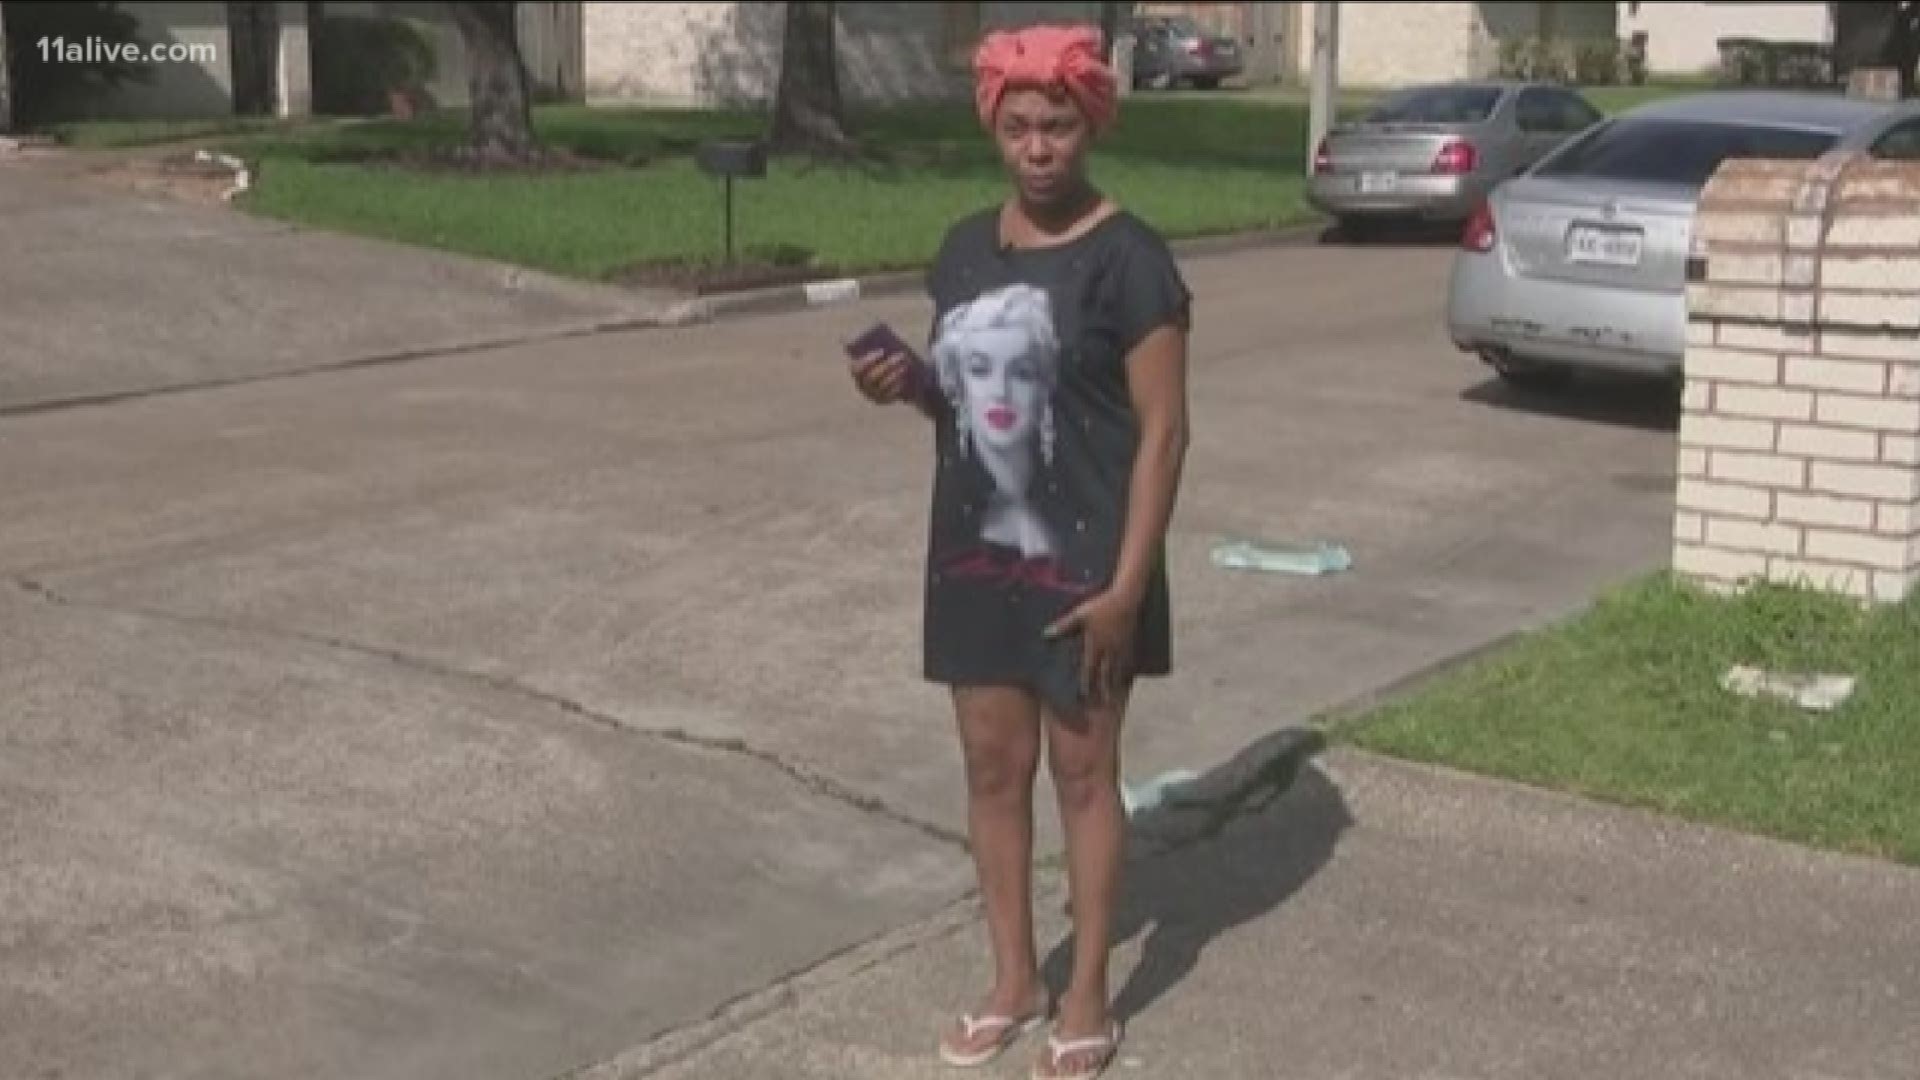 A Texas mother is upset and questioning the school’s policy after she was asked to leave campus because of her outfit.